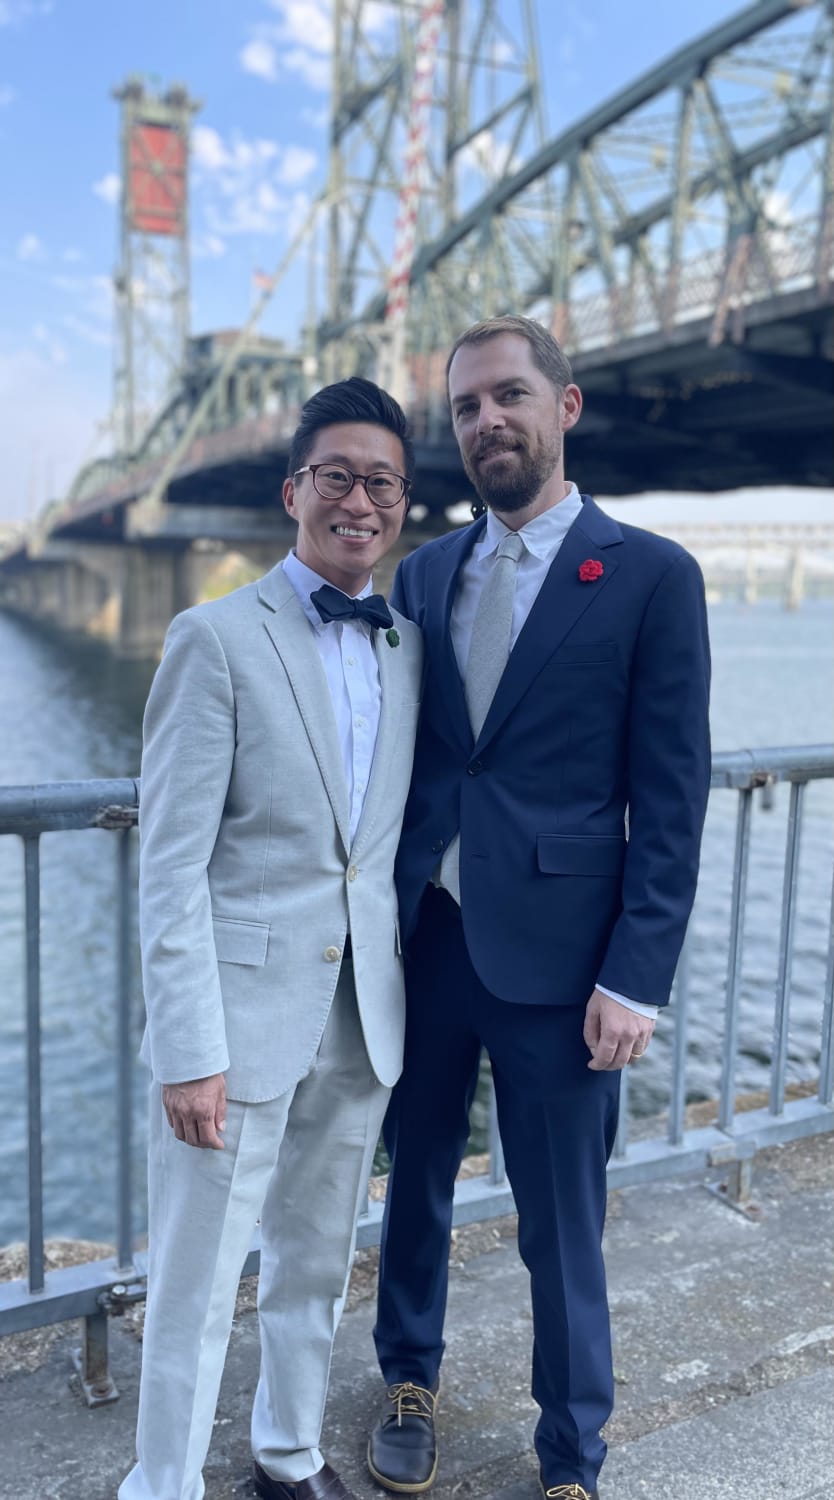 After 16 years, we eloped and are proud to be husbands!